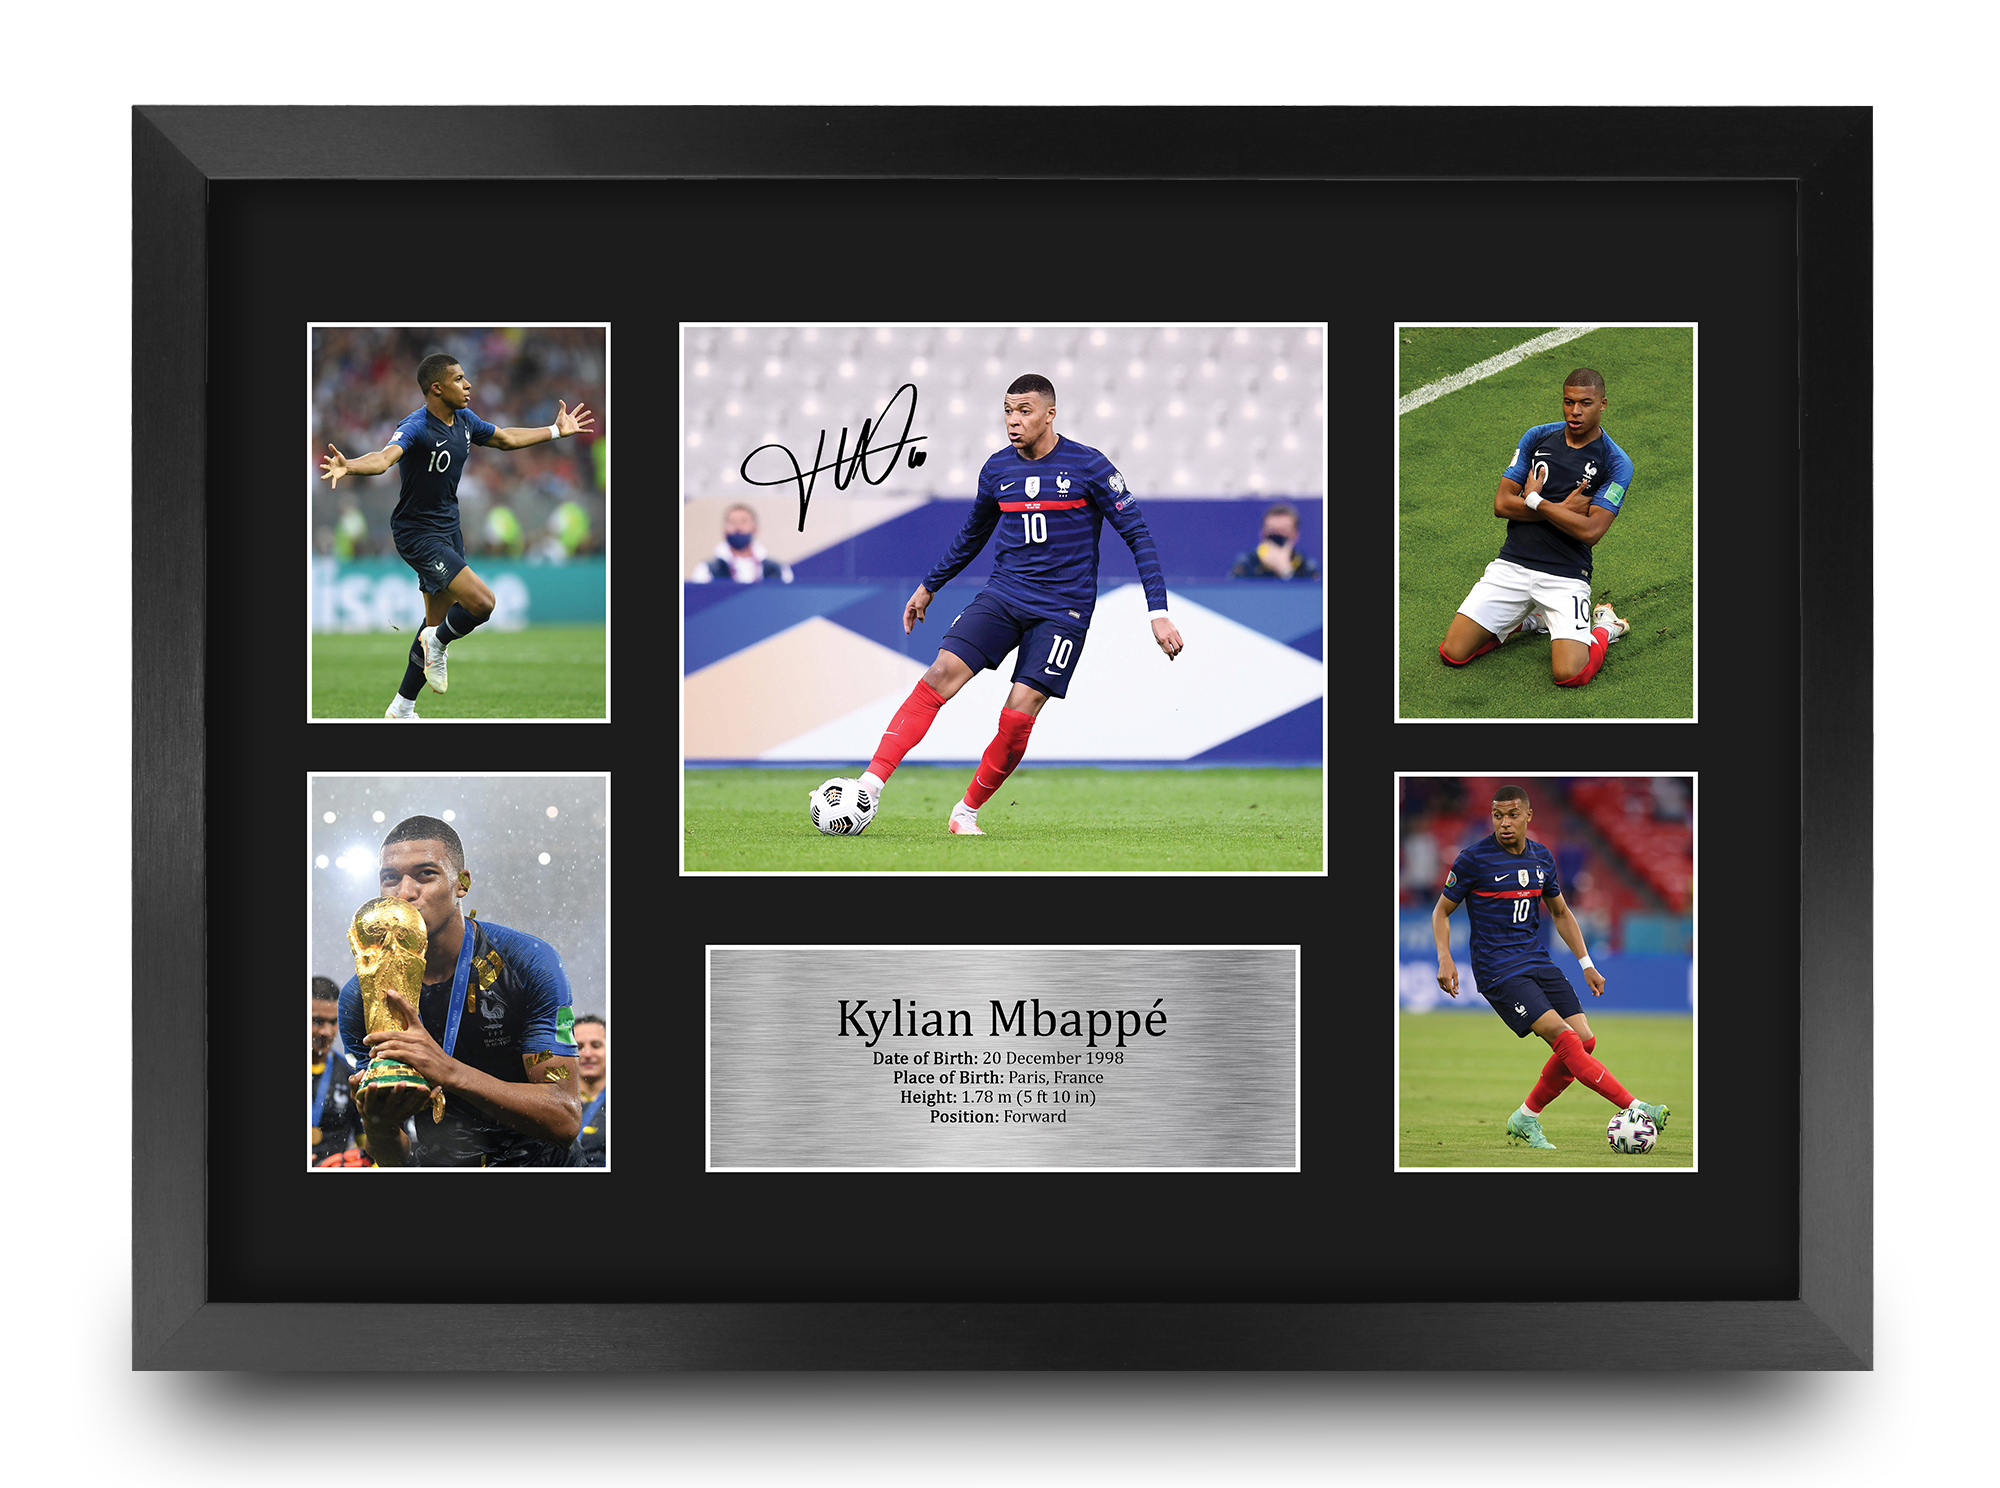 Kylian Mbappe A3 Framed France Gifts Printed Autograph Picture for Football  Fans | eBay